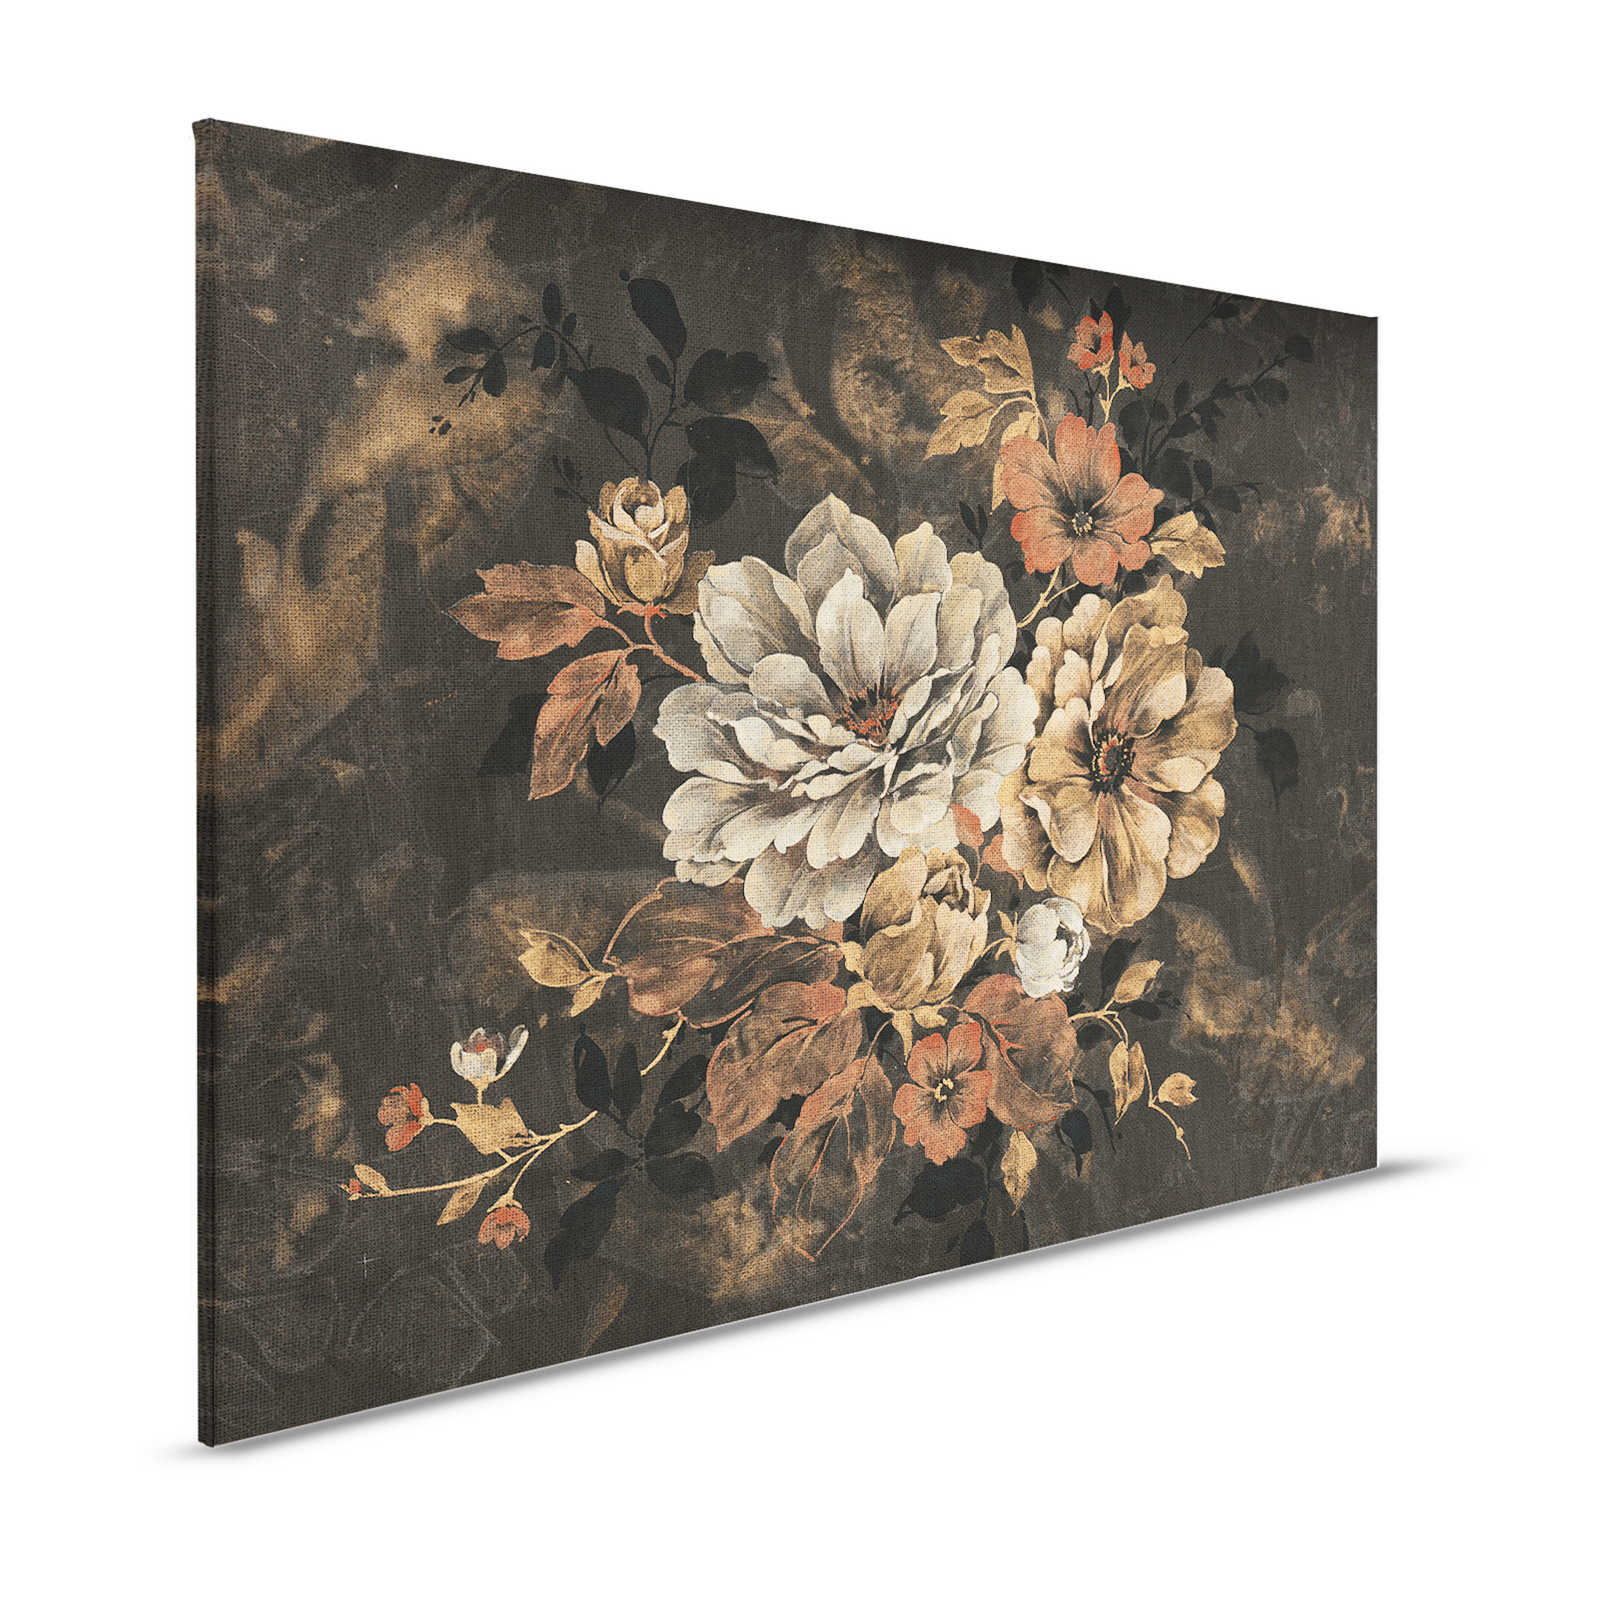 Canvas painting flower design, oil painting in vintage look - 1.20 m x 0.80 m
